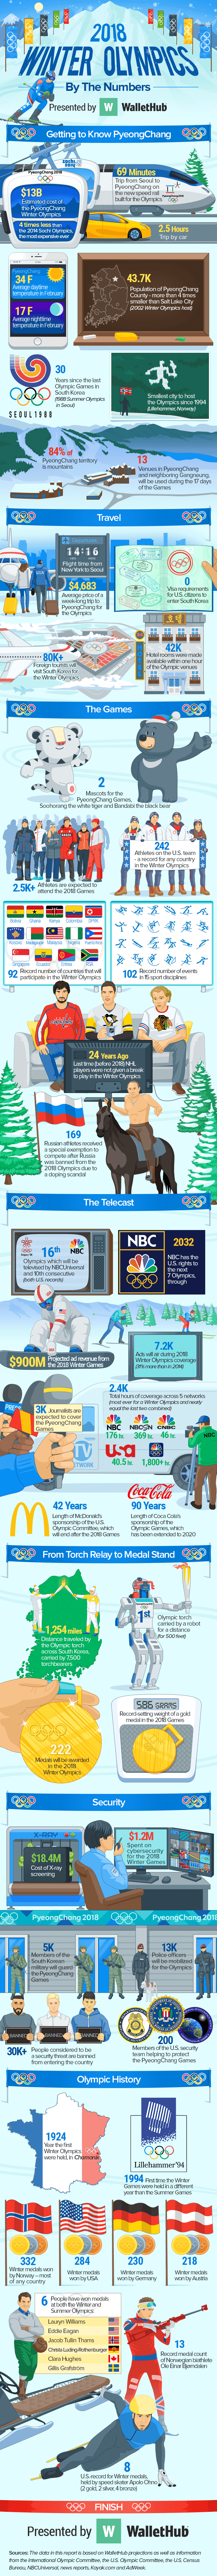 Winter olympics by the numbers